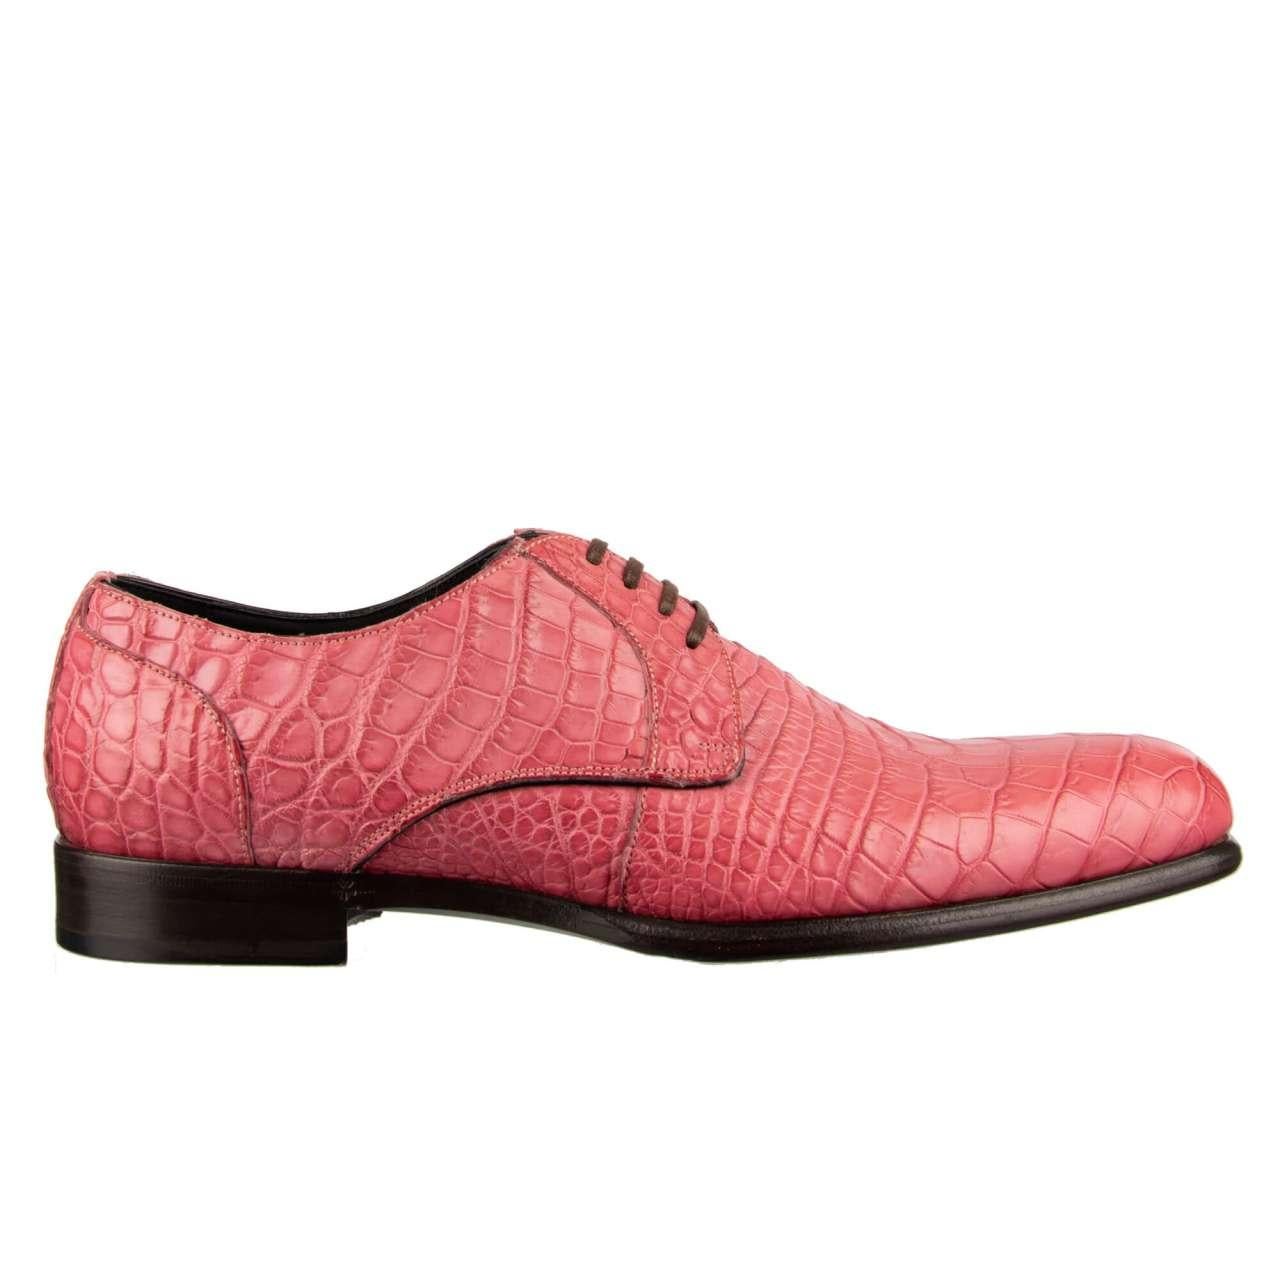 Dolce & Gabbana Crocodile Leather Derby Shoes SIENA Pink EUR 40 For Sale 4